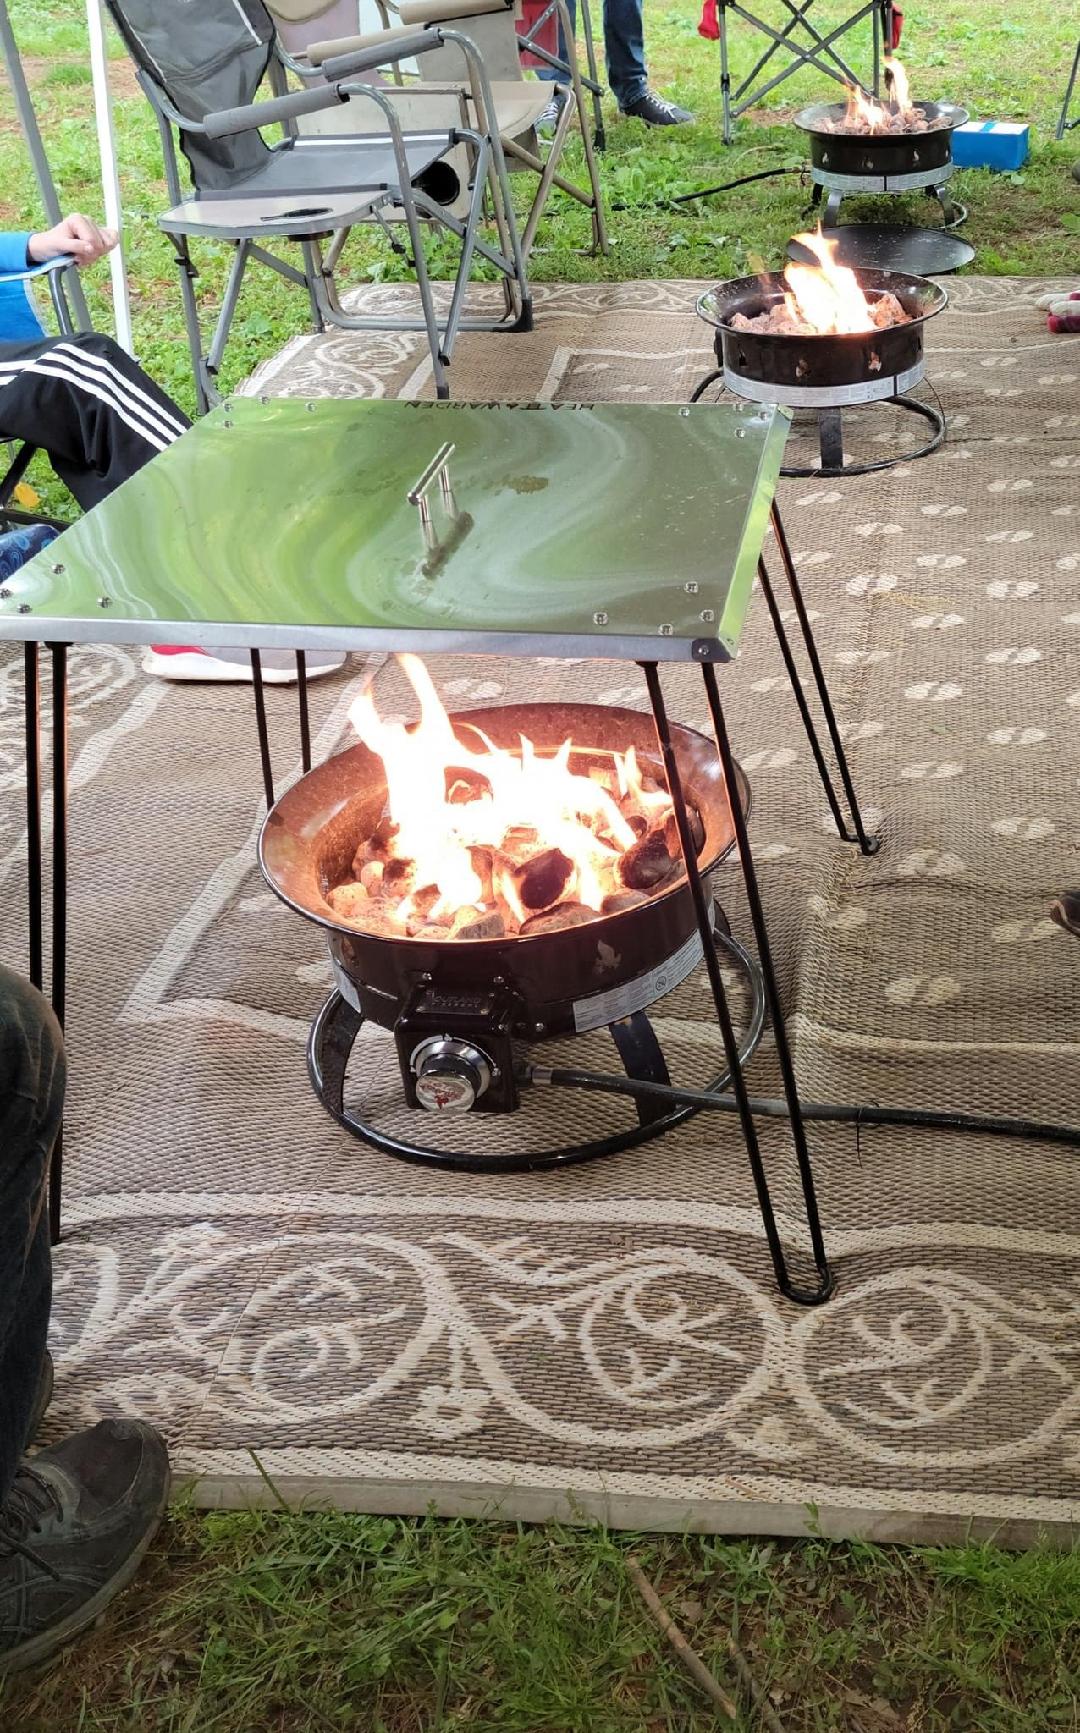 The New "MUST HAVE" for Camping. Heat Warden® USA QUALITY 24"x 24" Camping Square Heat Deflector with 24" Foldable Legs. (See menu above for Specs.)